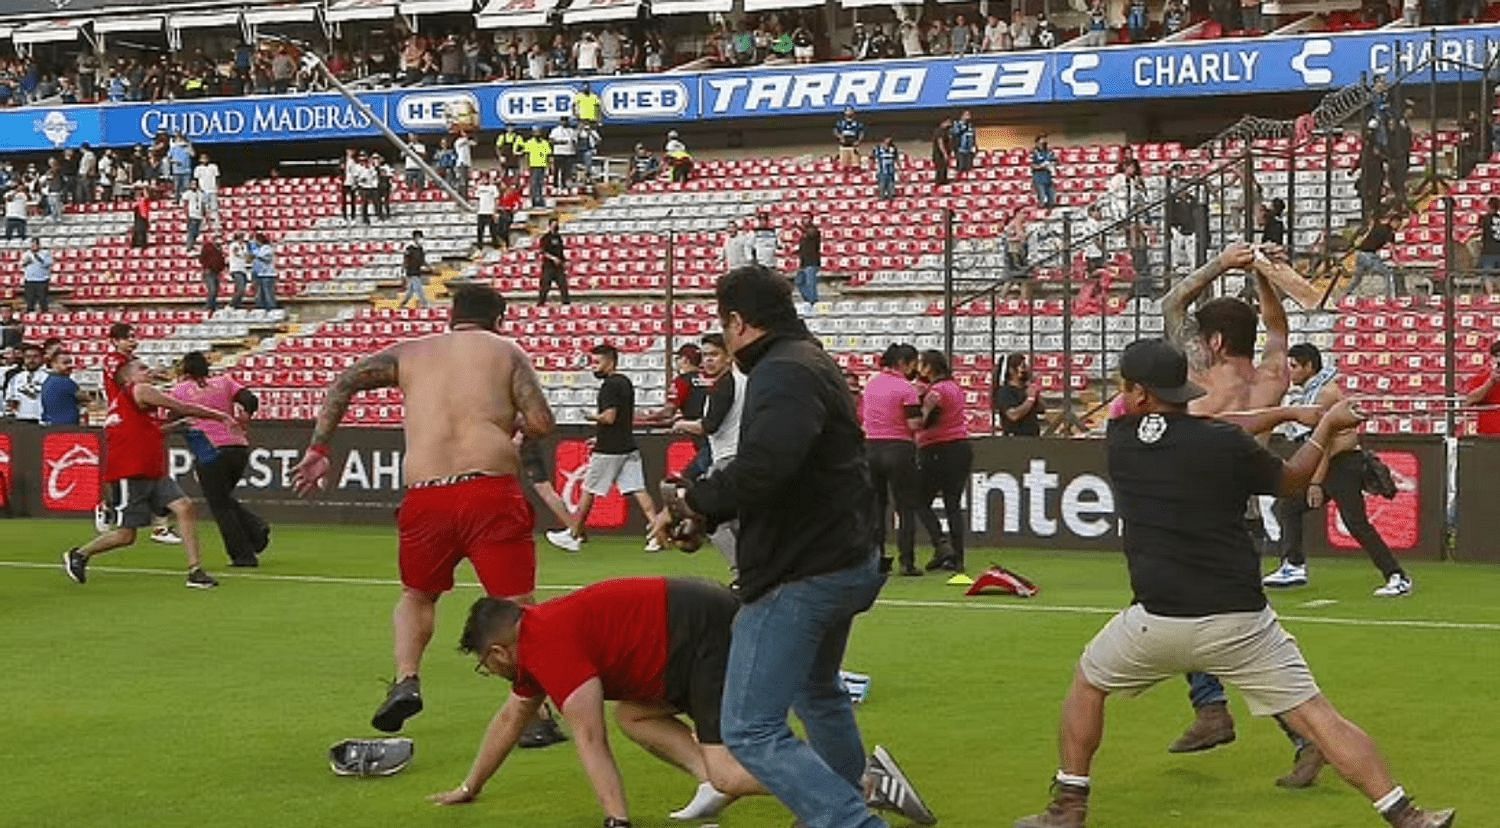 A terrifying brawl occurred at a Mexican soccer game leaving several injured (Image via EPA)